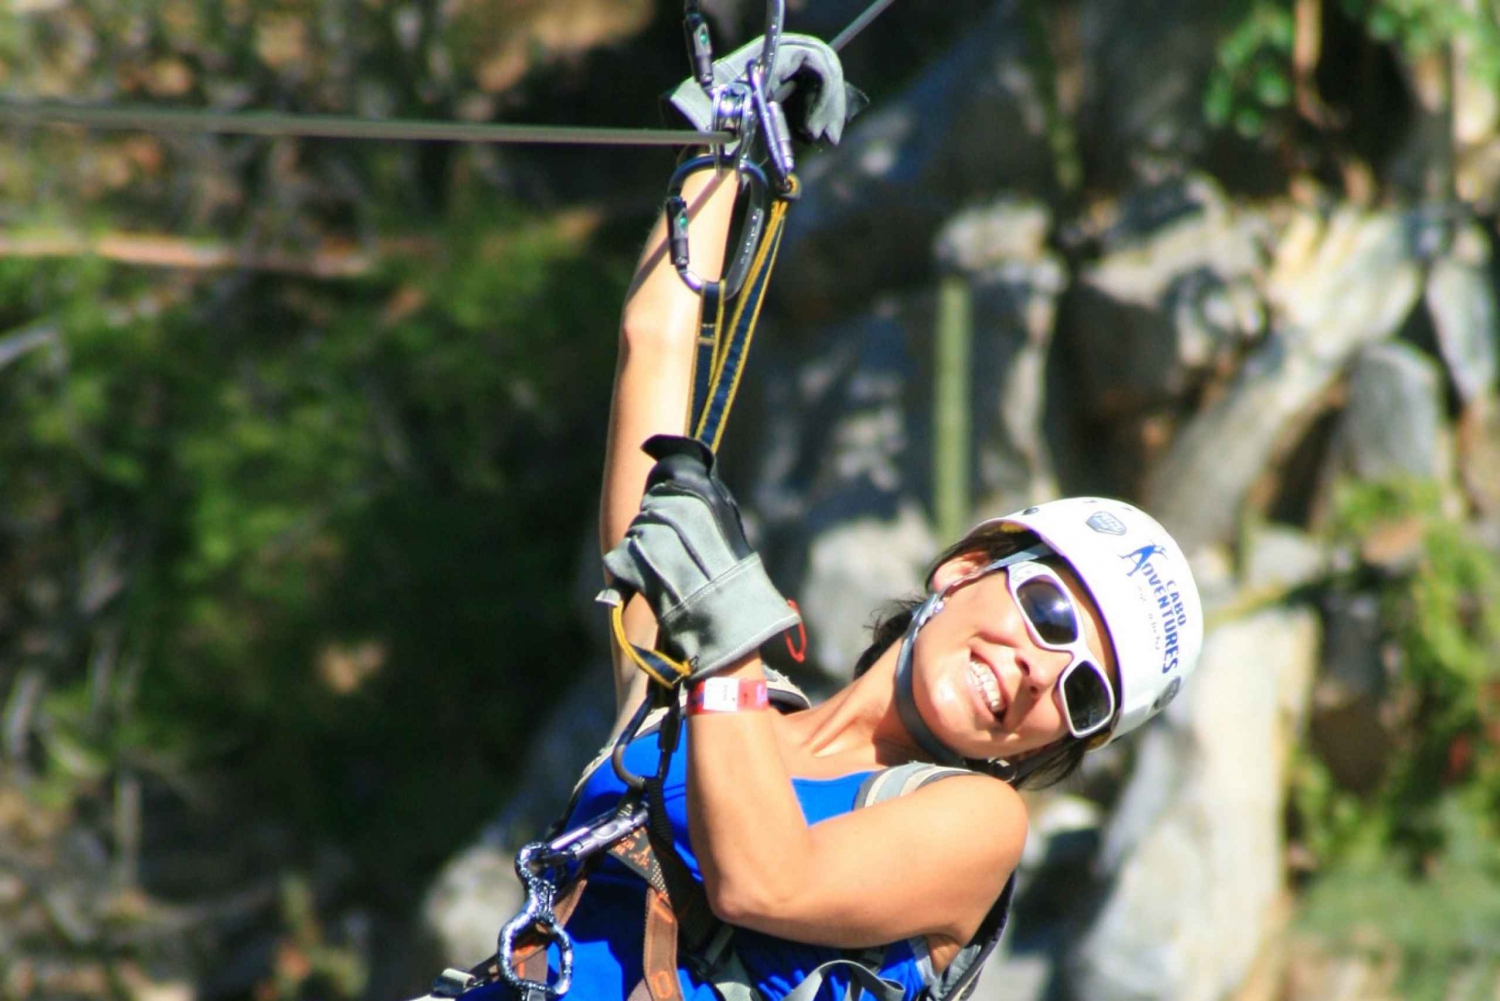 Los Cabos: Zip Lines and UTVs with Mexican Lunch and Drinks